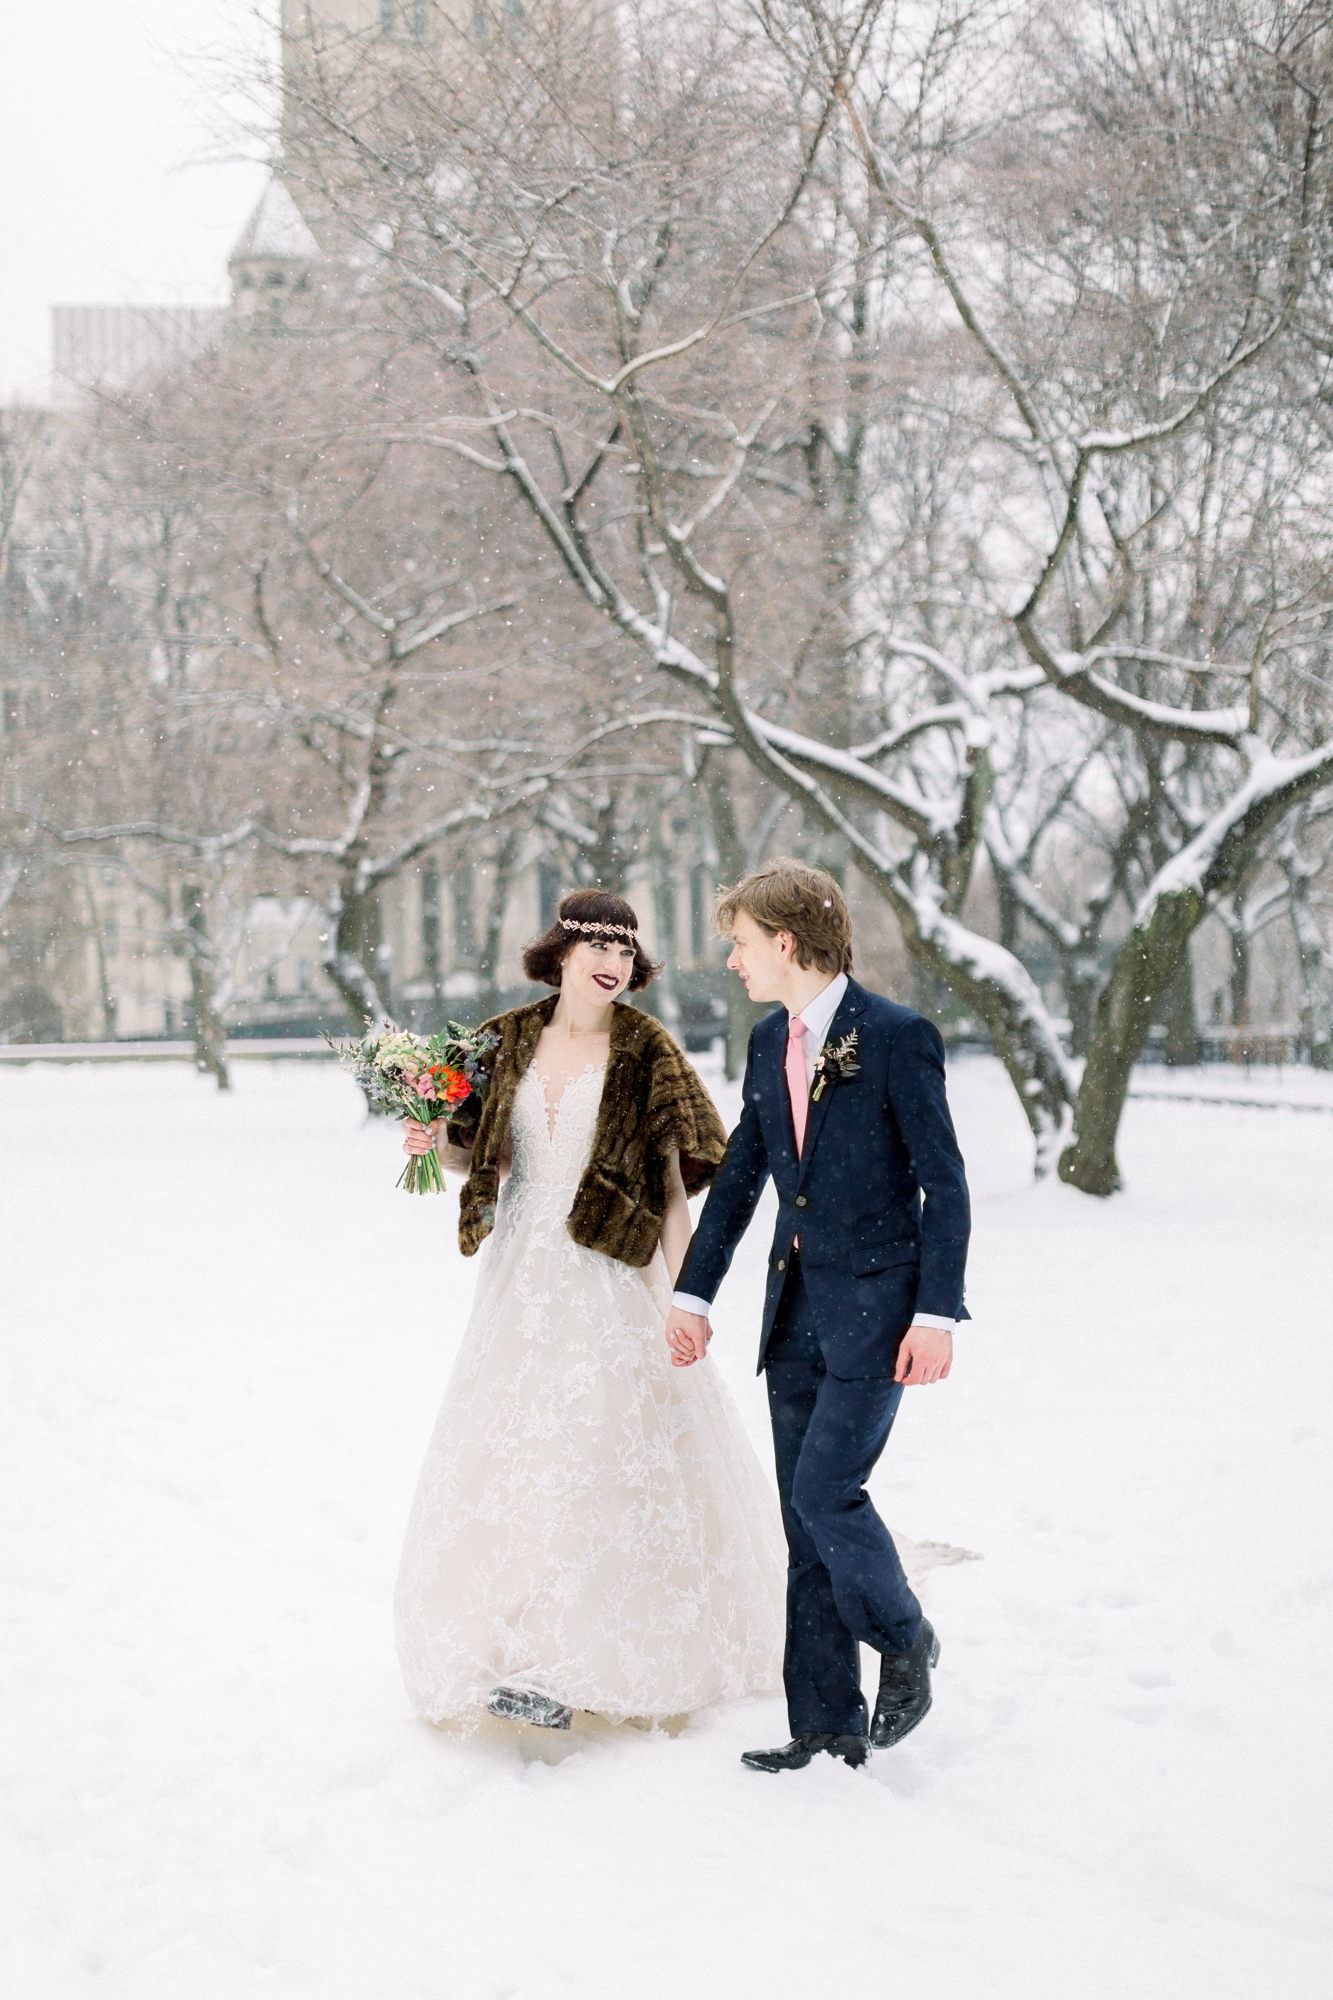 Small NYC Winter Wedding in Riverside Park